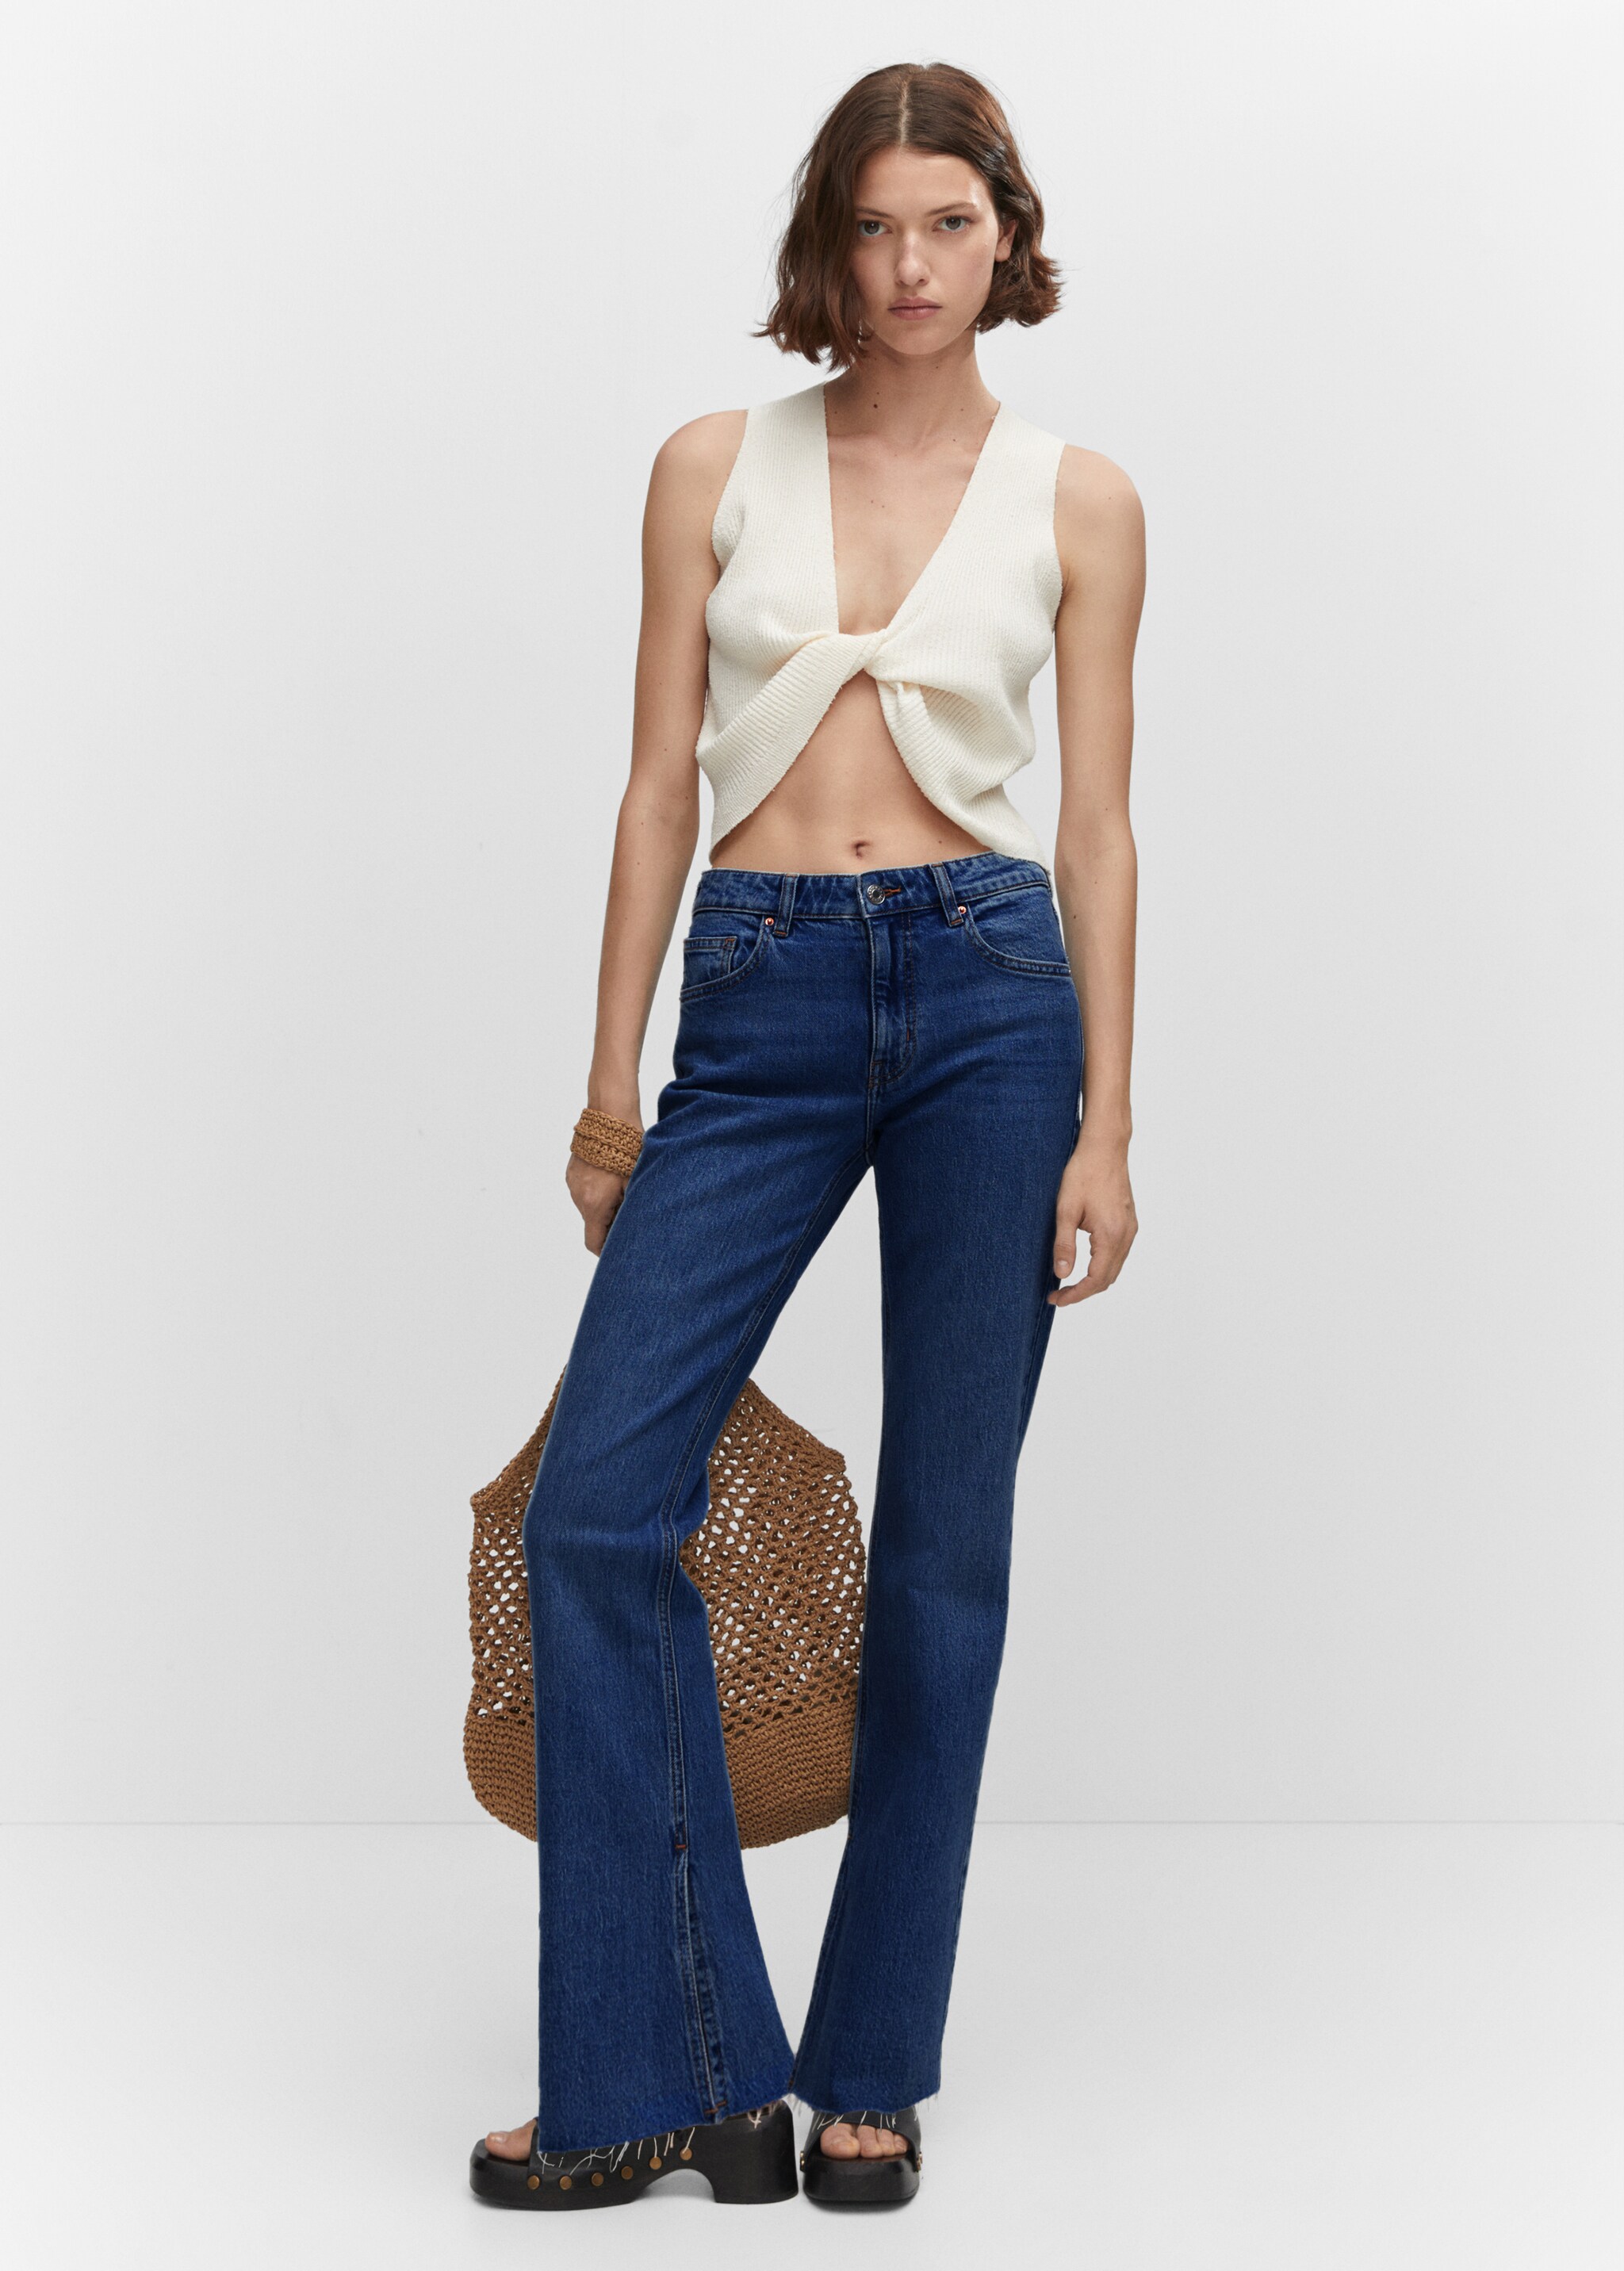 Mid-waist flared jeans with slits - Plan general